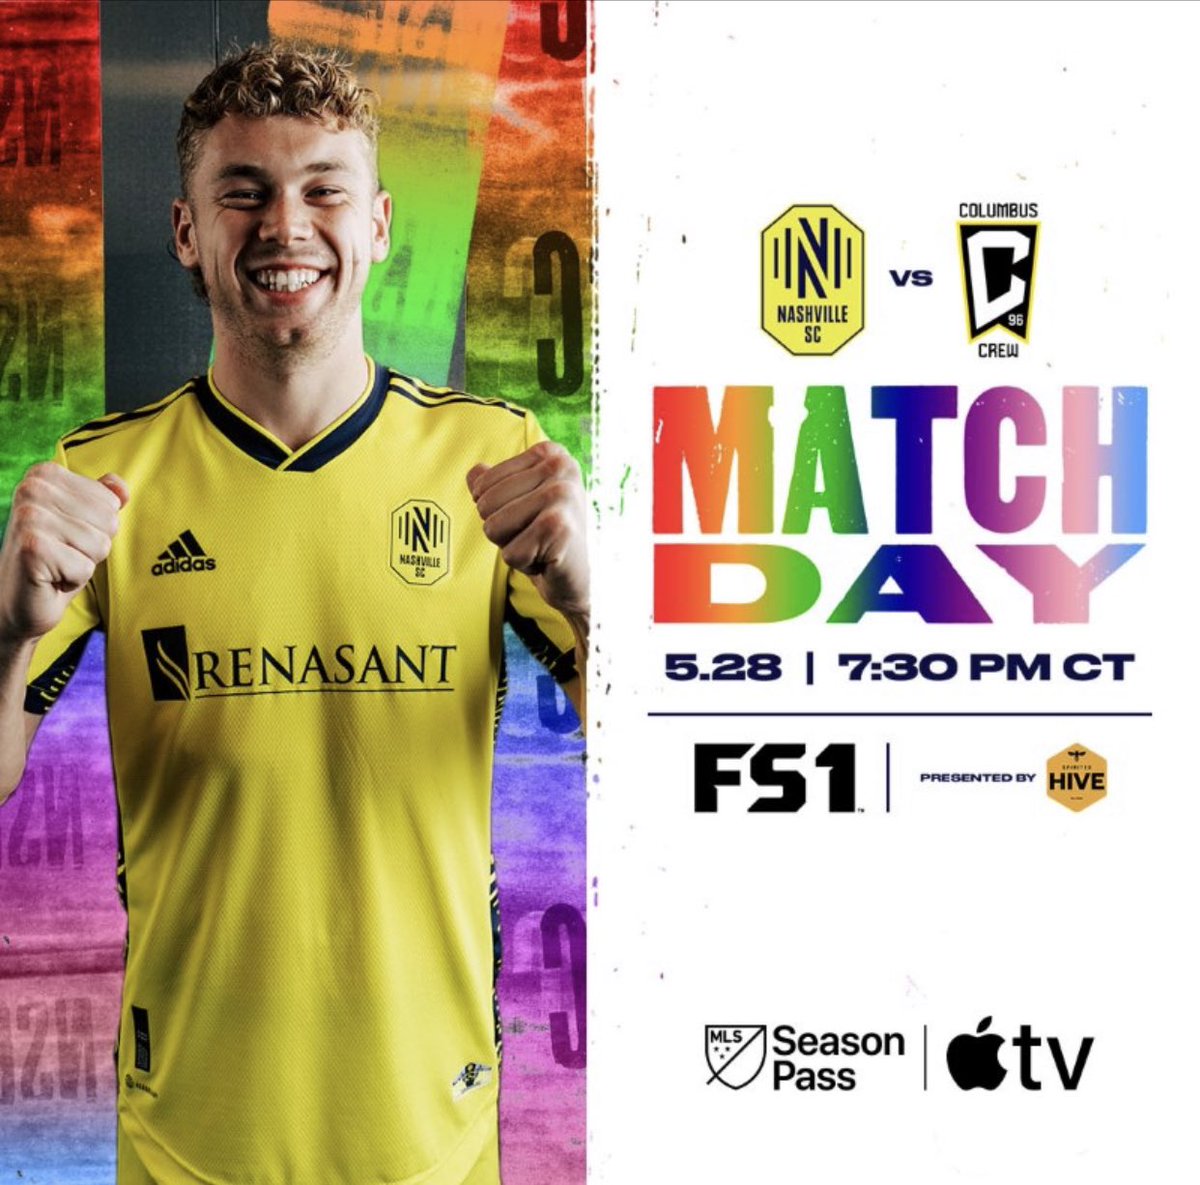 @double3 @NashvilleSC @budlight @Target @thenorthface @MLS You’re gonna make Shaffleburg cry.  Just look how happy he is!  

I suggest you stay home tonight and try not to do a bigotry.